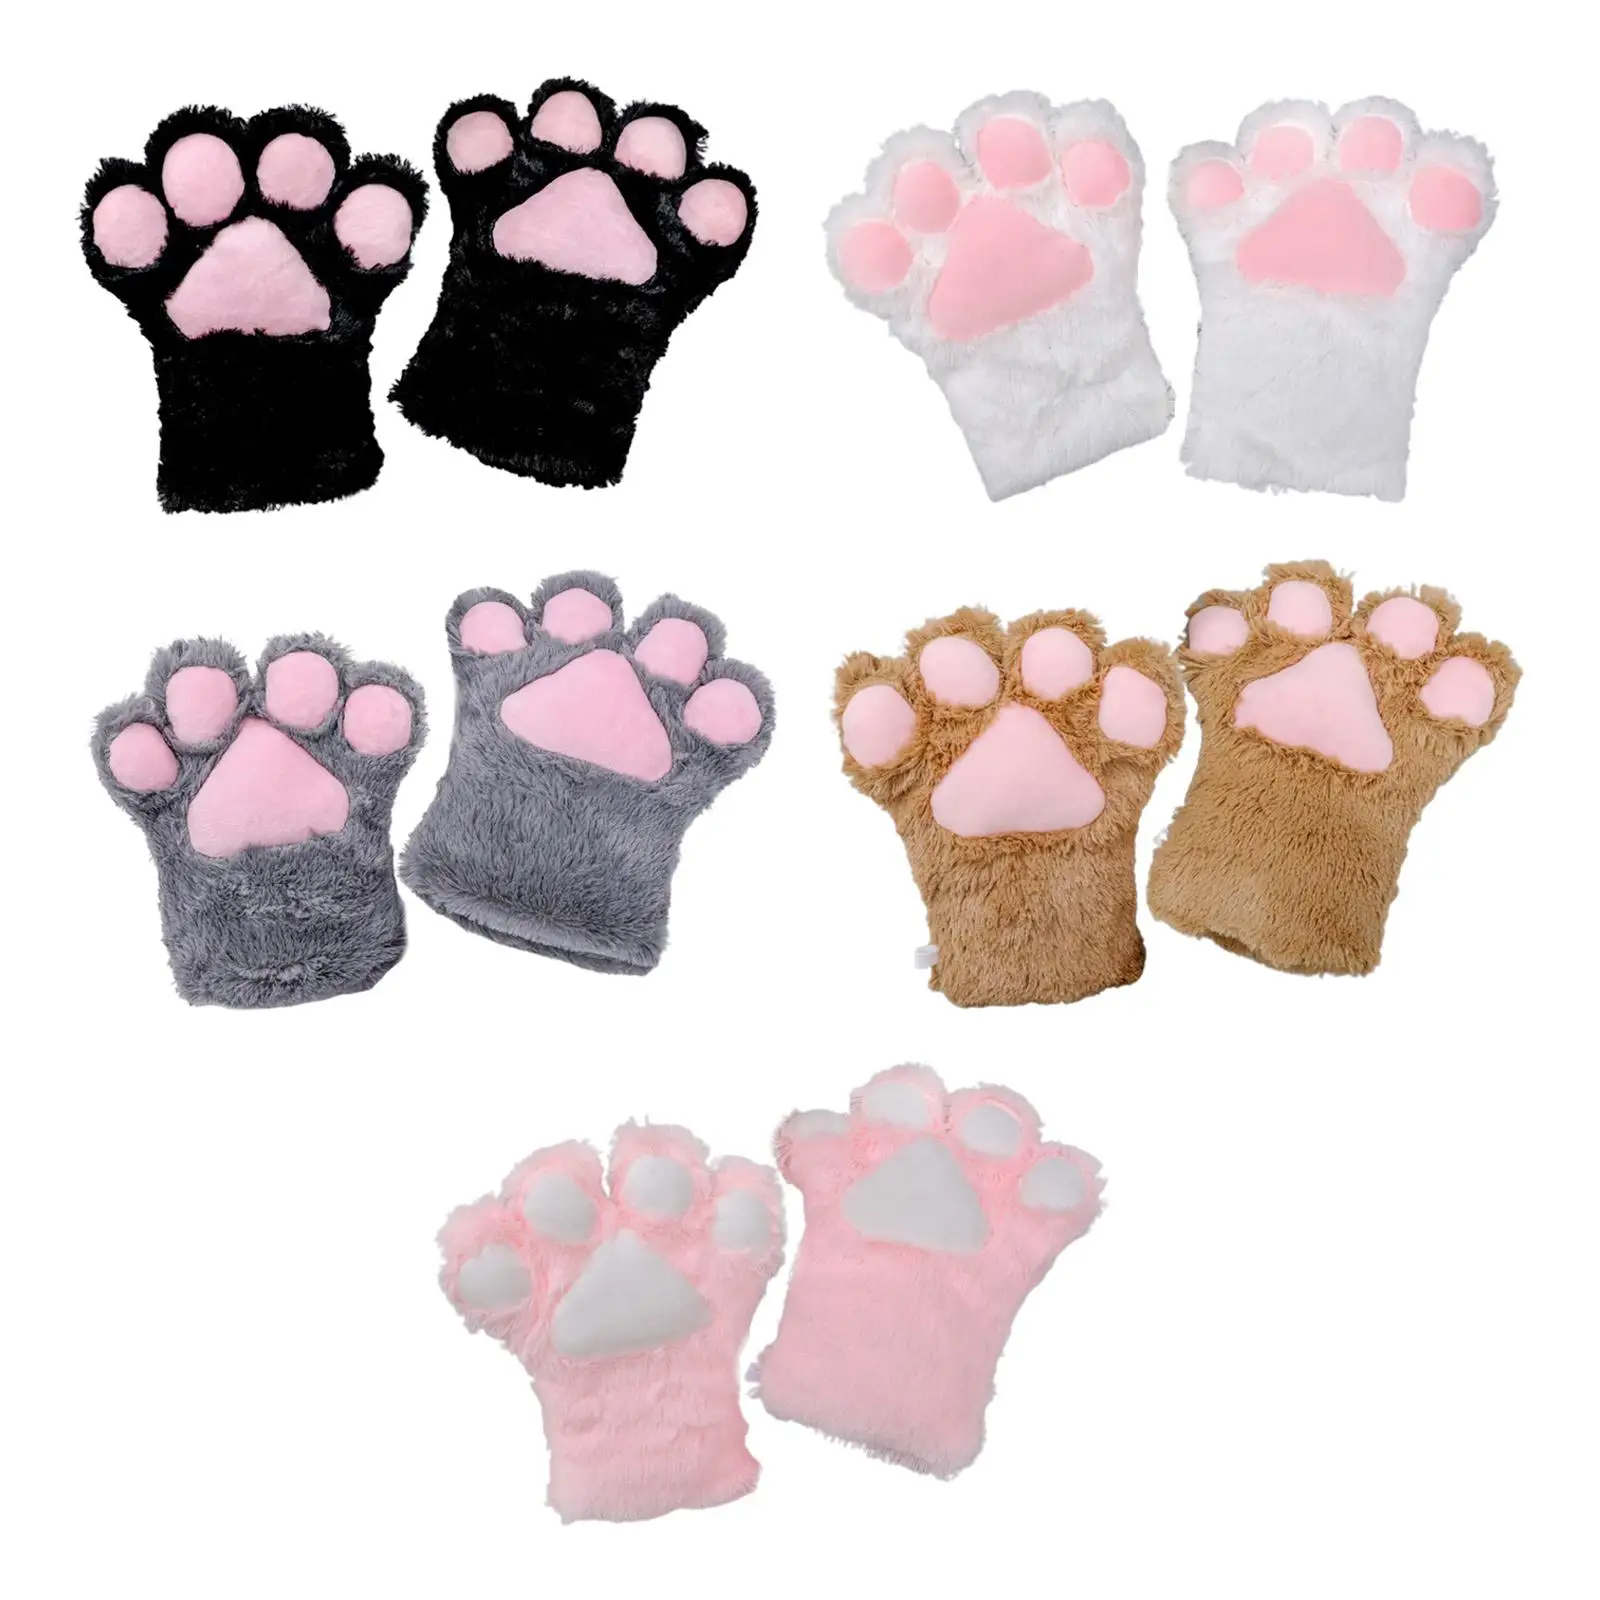  Paw Gloves Half Finger Gloves Warm Pv Flannel Soft for Performance Outdoor Hiking Halloween Winter Daughter